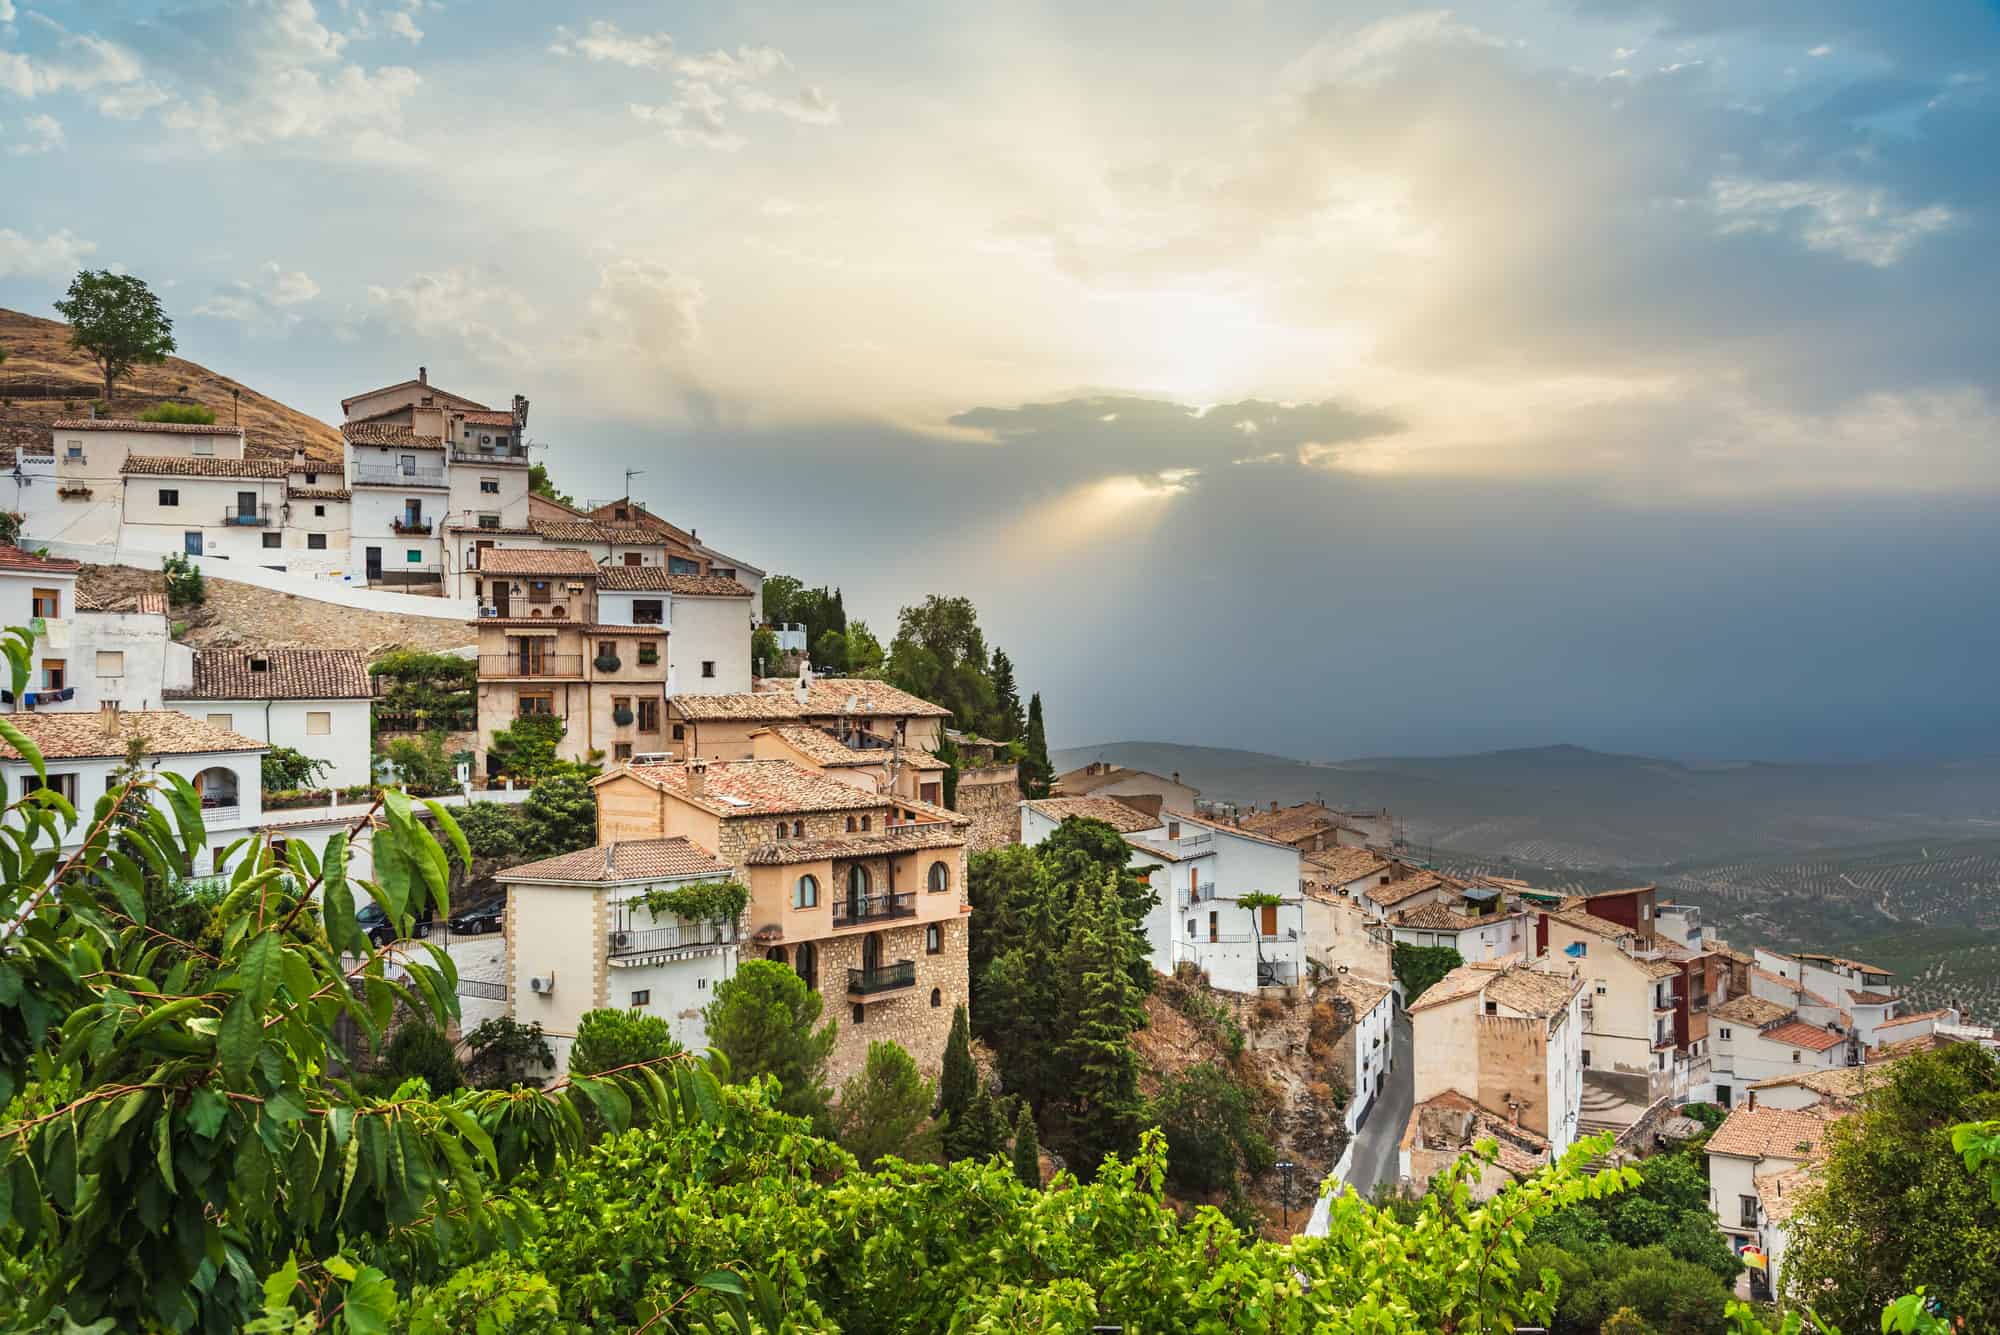 La Iruela,Cazorla,Jaen,Andalucia,view of the town with the olive groves in the background